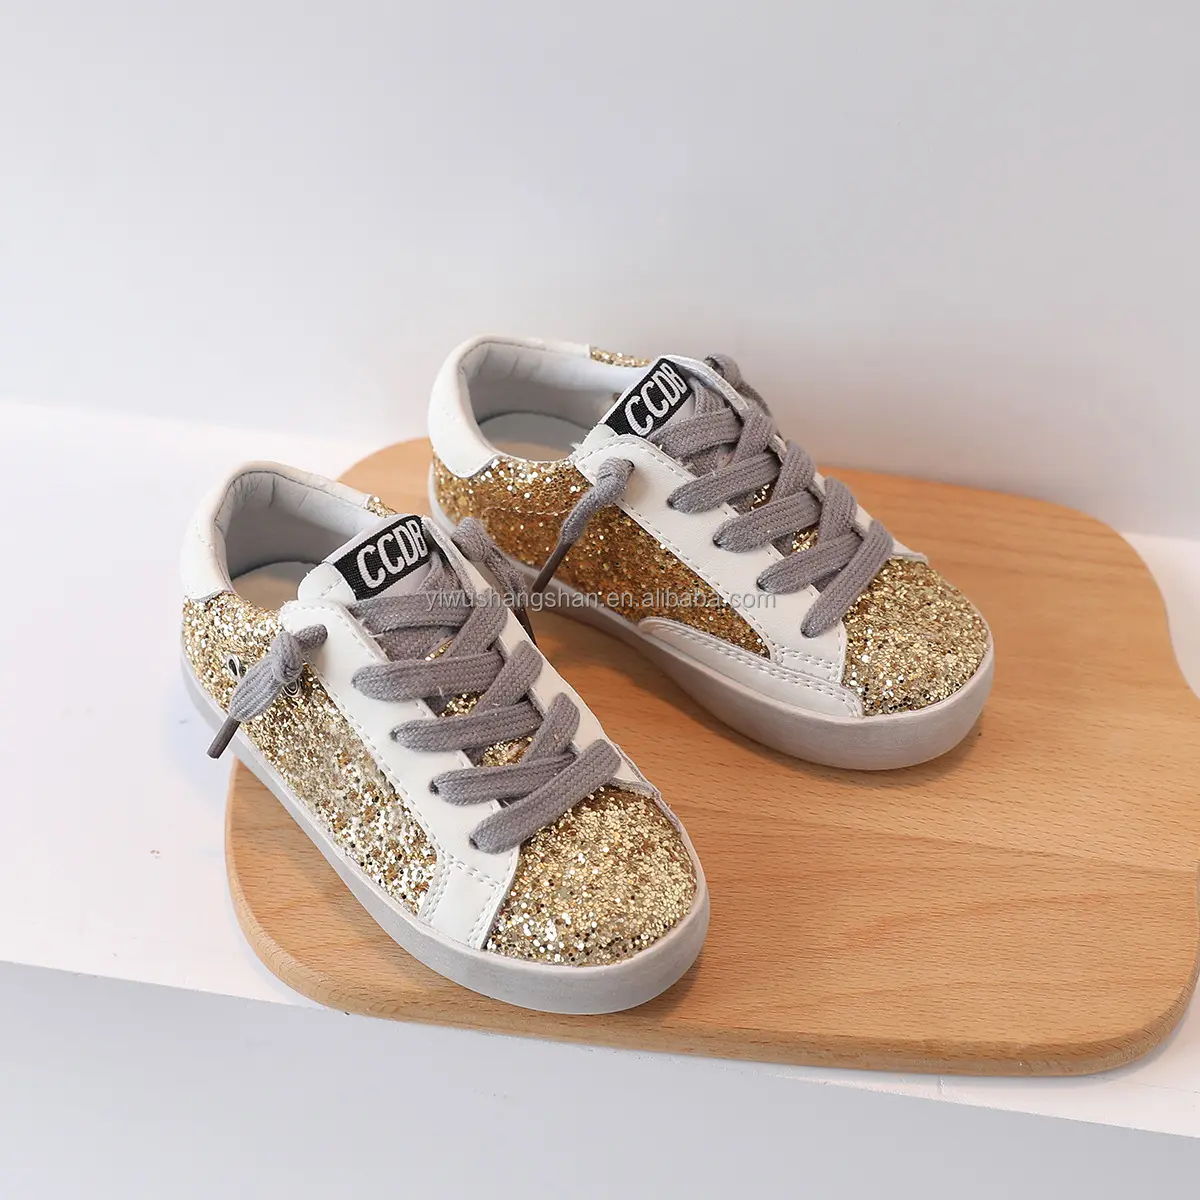 New Fashion Kids Children's Star Board Shoes Baby Girls Sequins Casual Shoes Soft Small Dirty Shoes